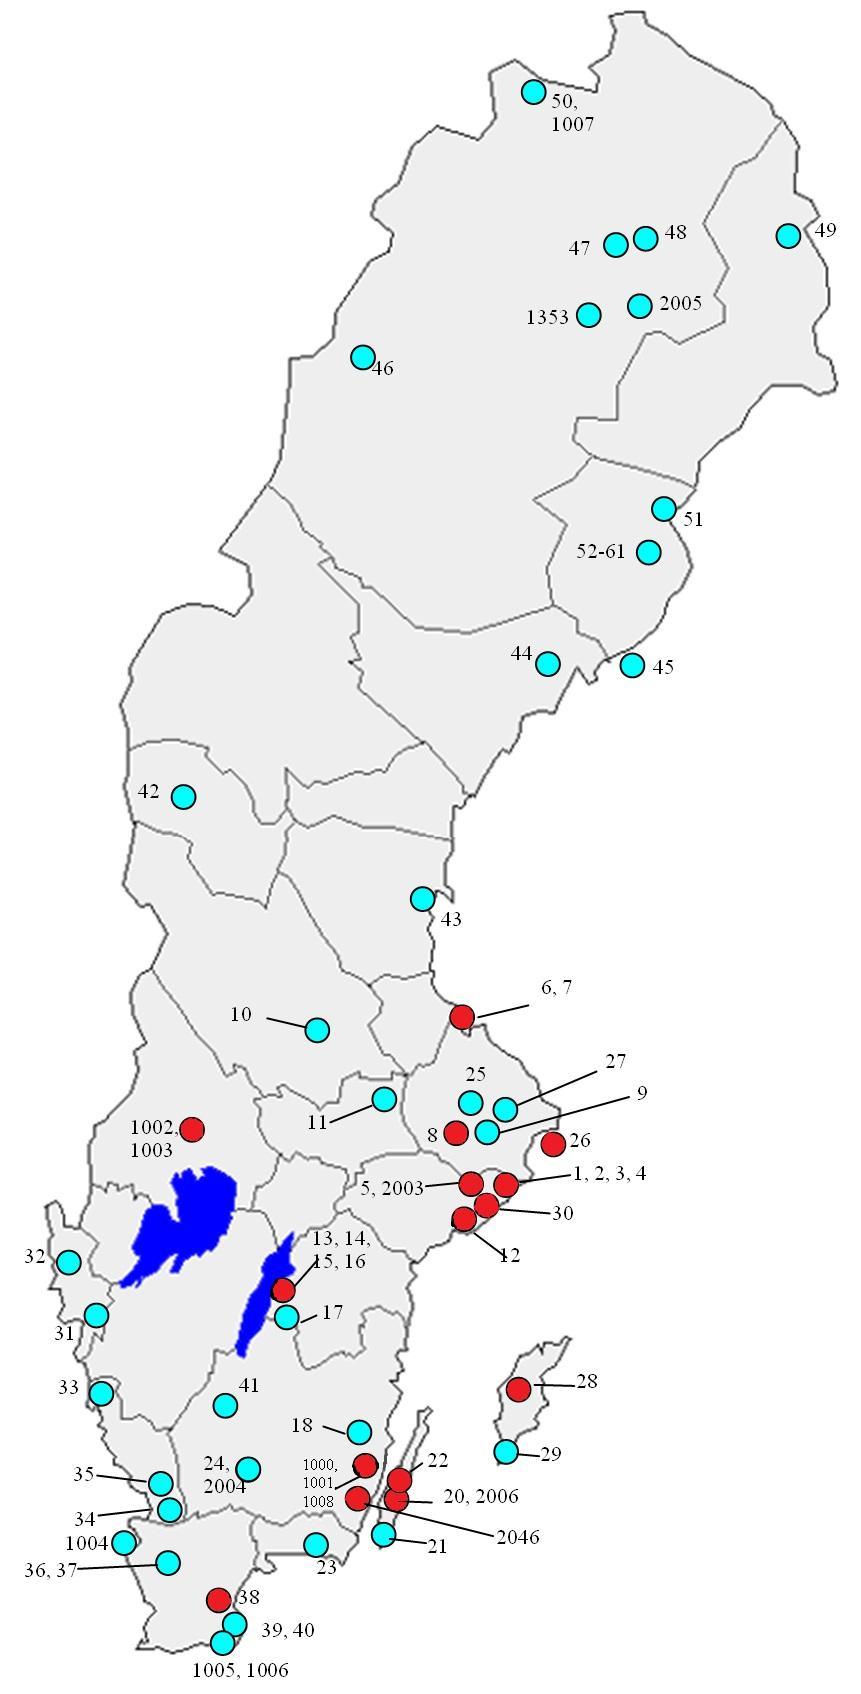 Appendix 2 The SMTP map, over all the traps around Sweden. The red traps are where Orthopelmatinae was found.